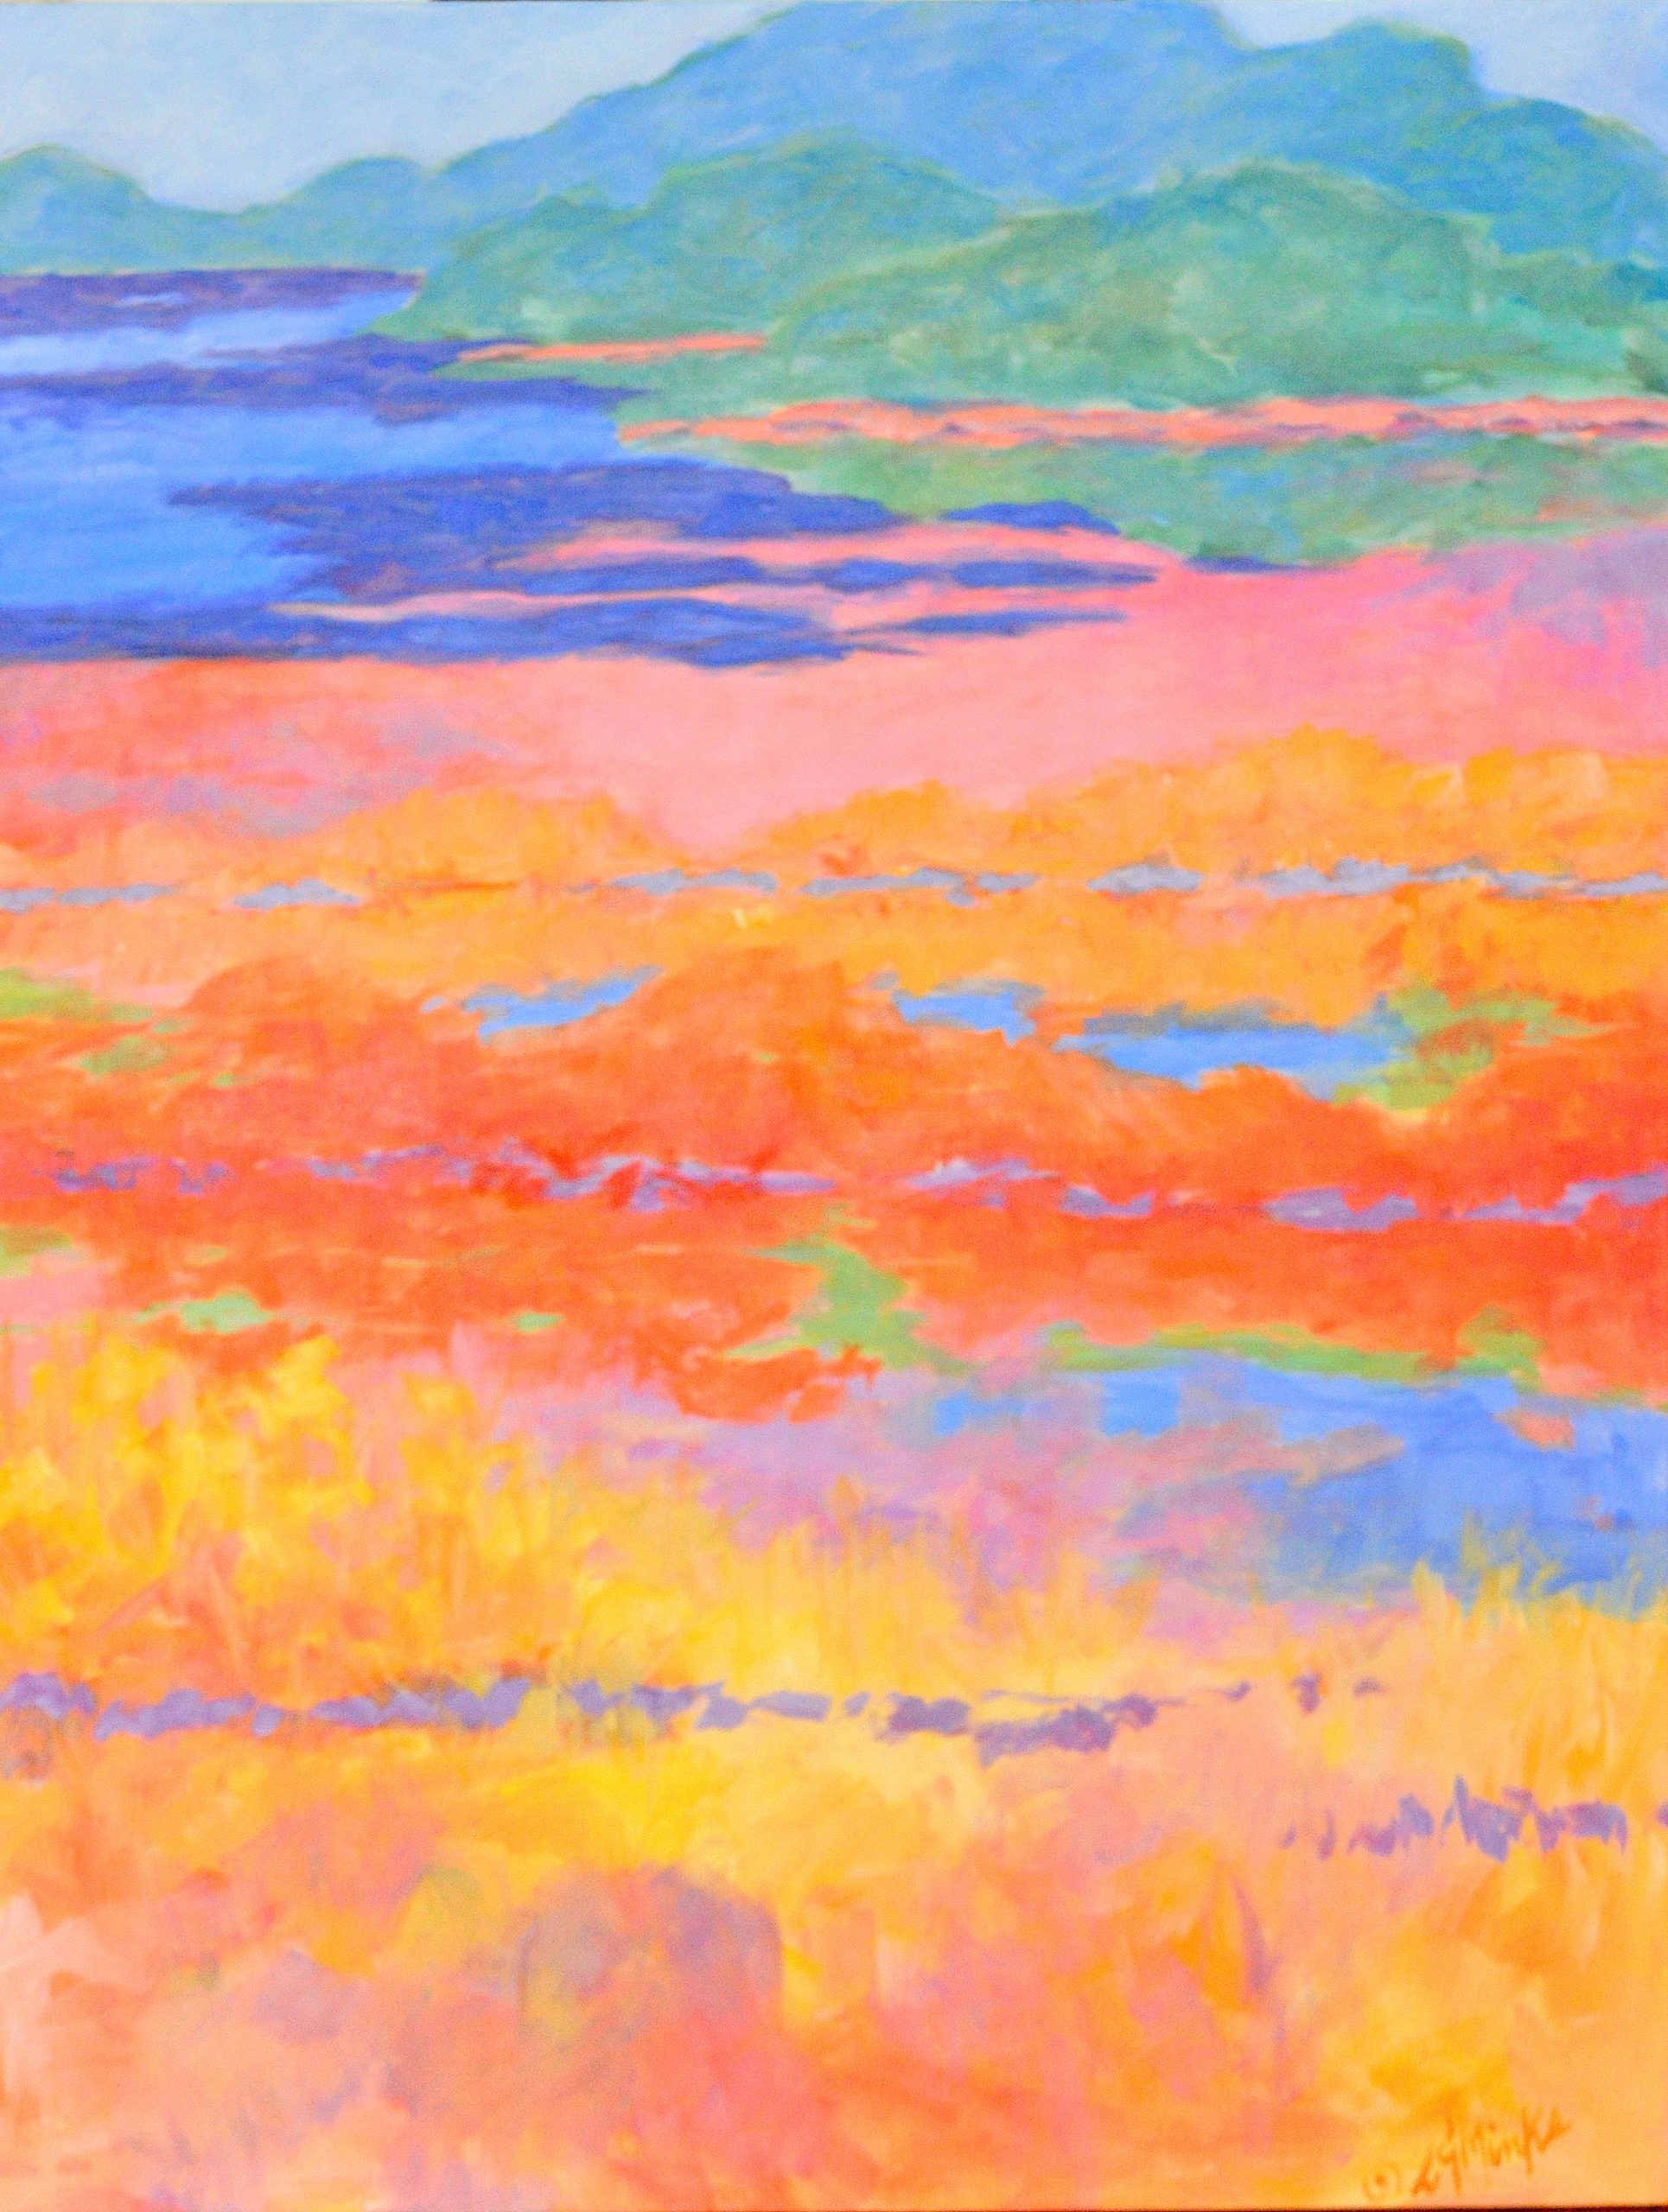 An abstract painting of a colorful pond